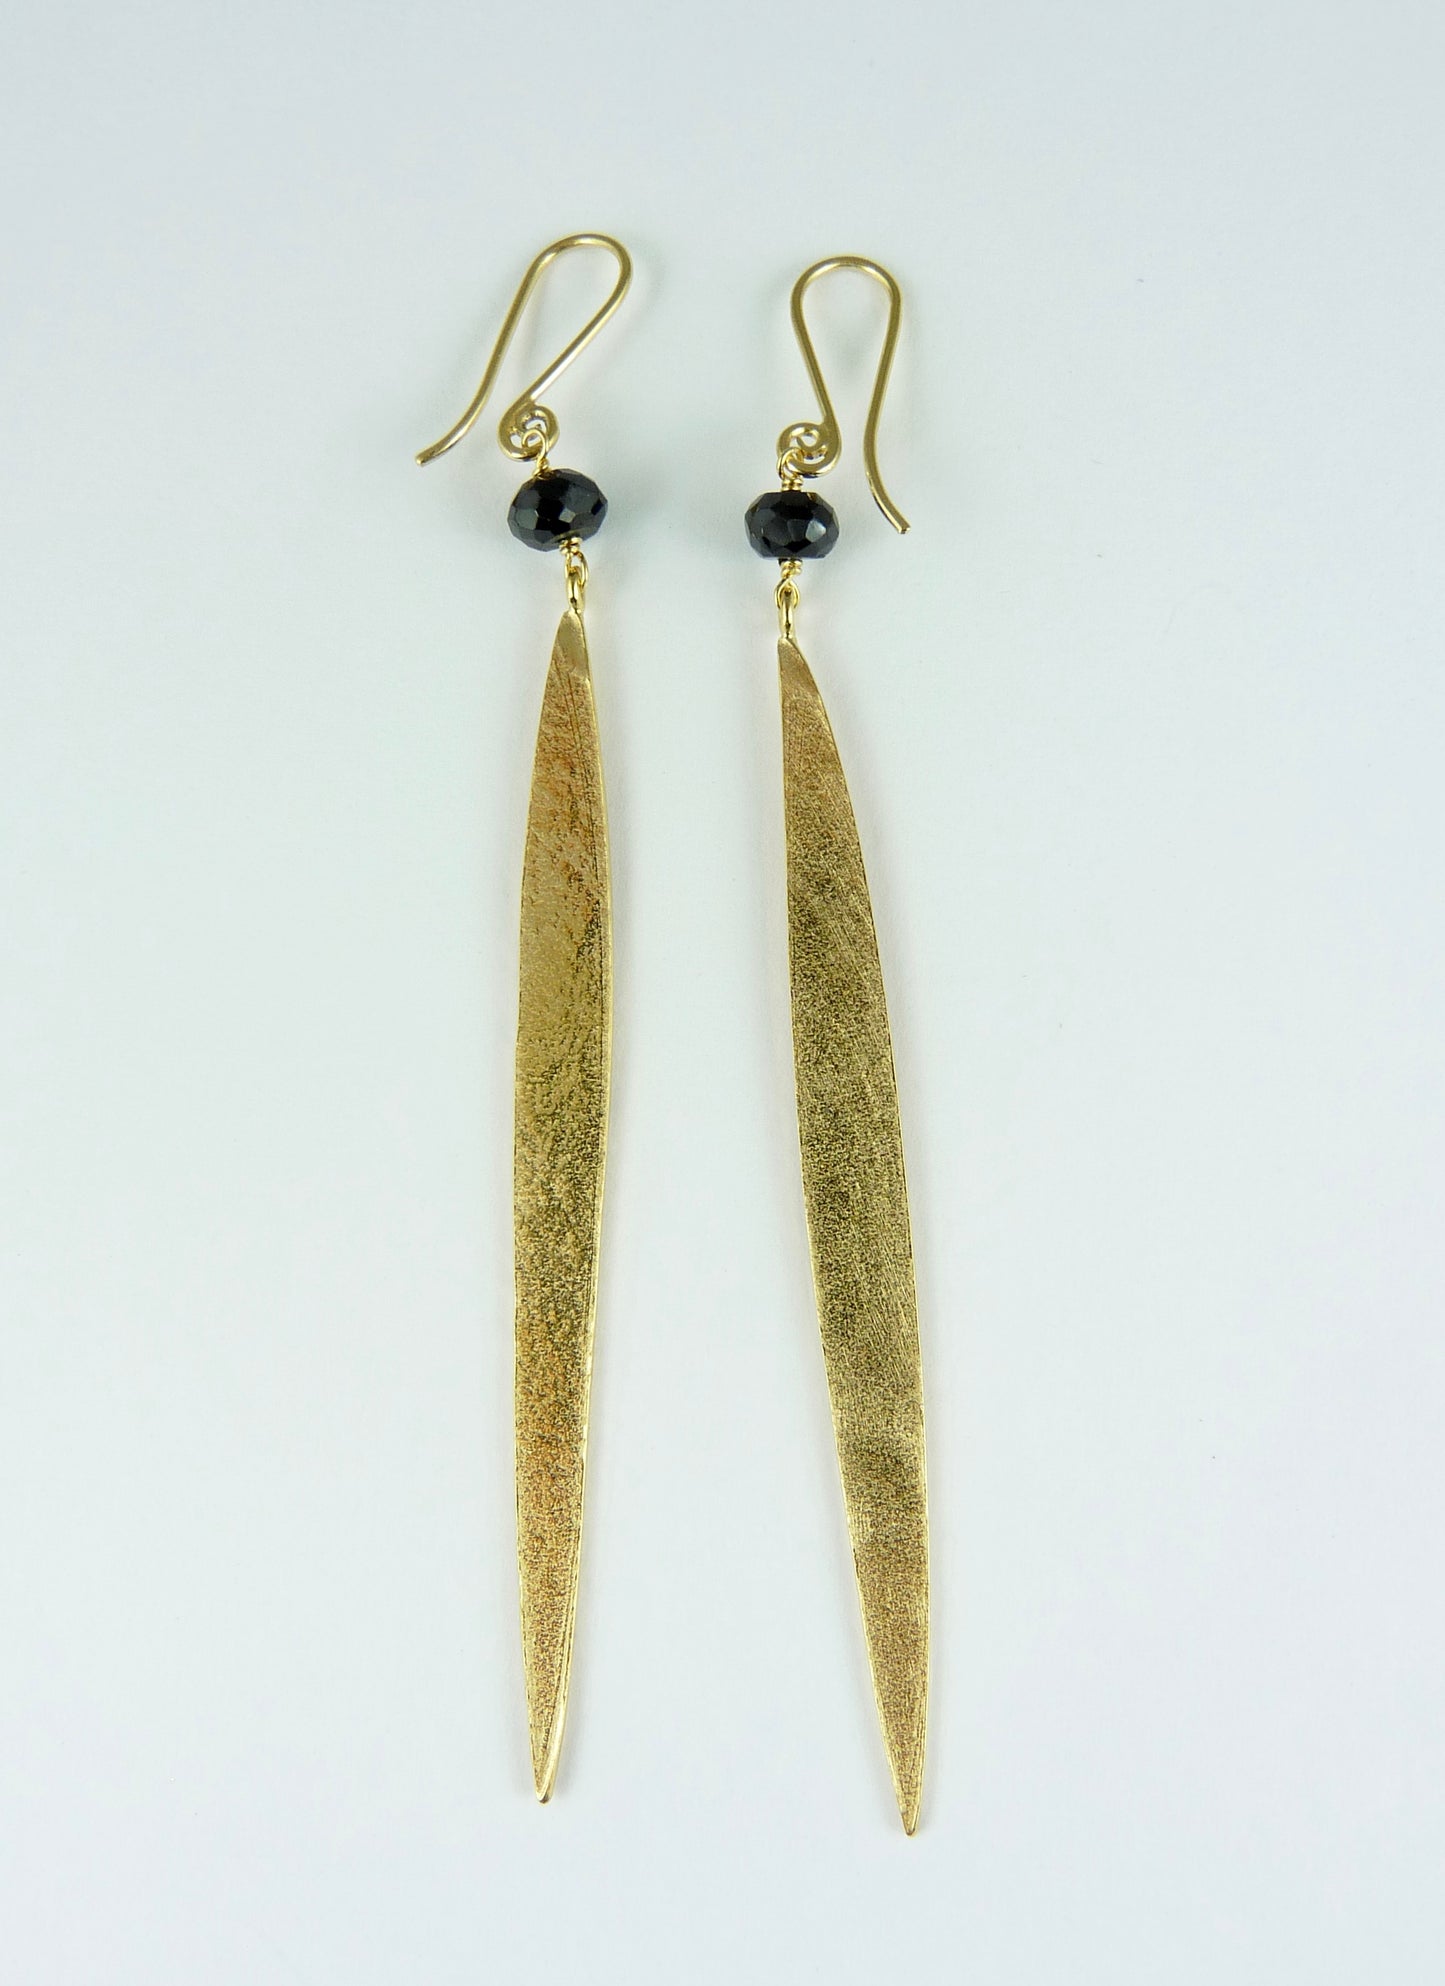 Lily Long Single Leaf Earrings with Black Spinel